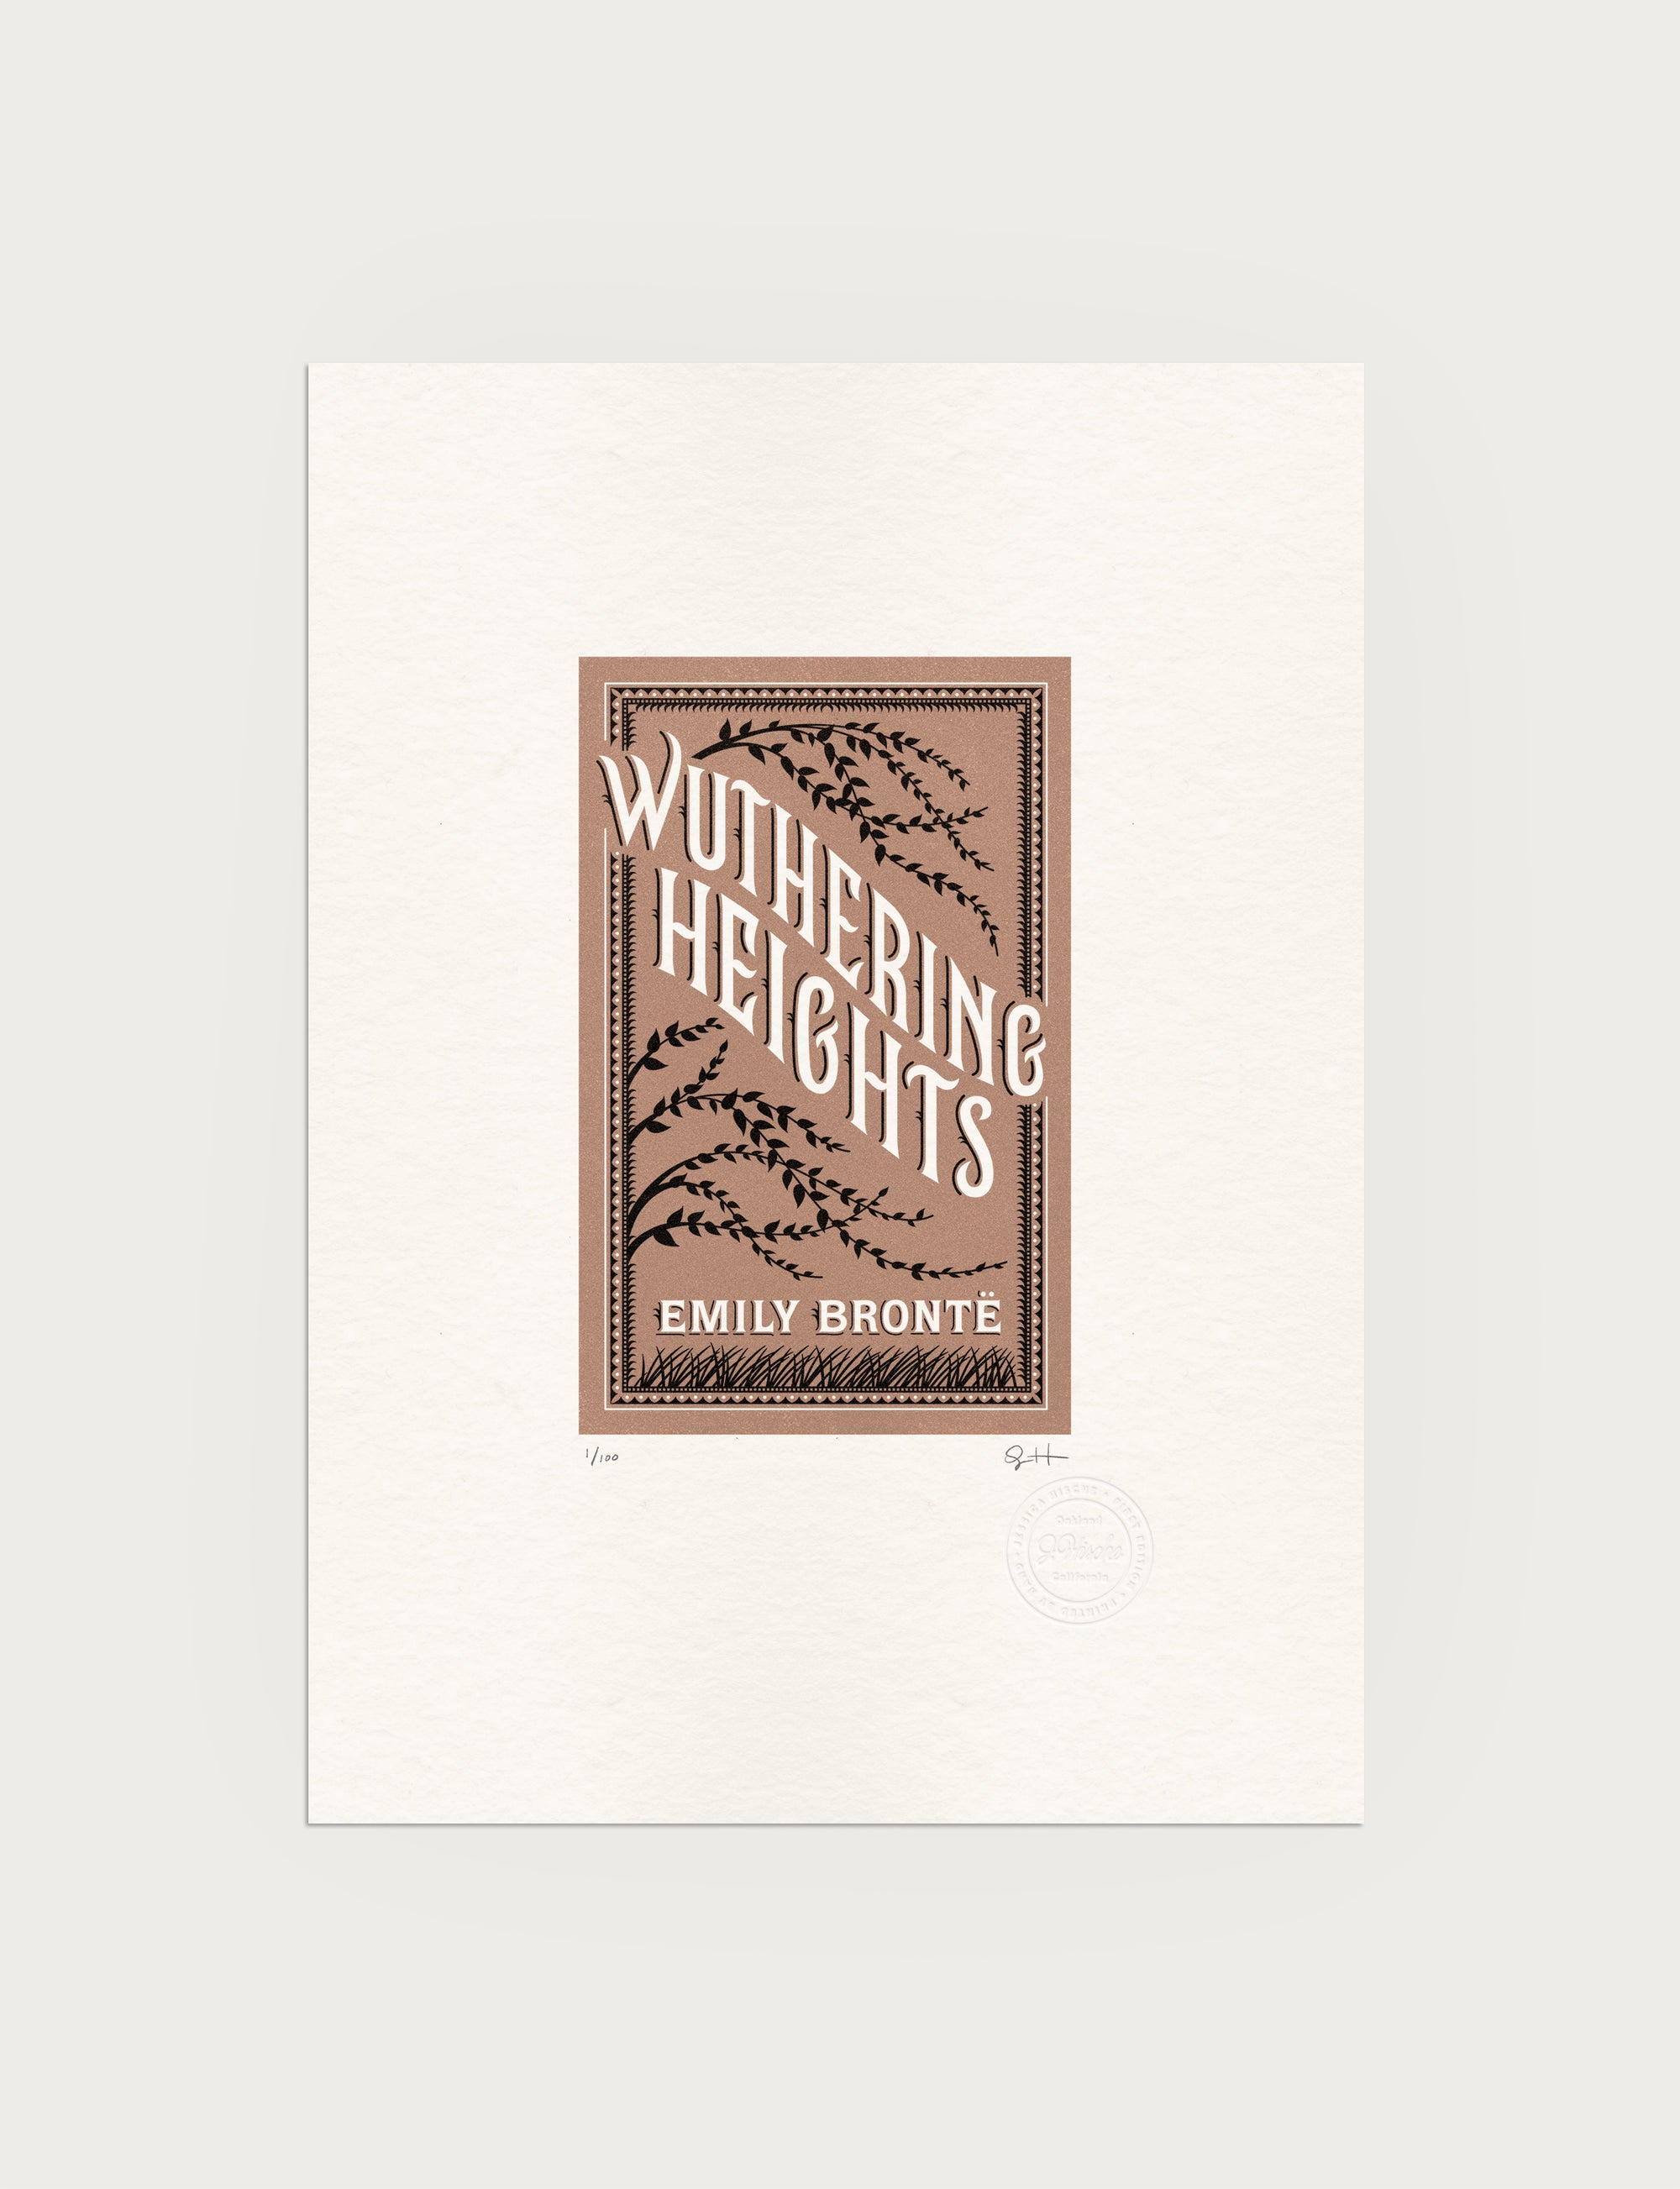 2-color letterpress print in brown and black. Printed artwork is an illustrated book cover of Wuthering Heights including custom hand lettering.